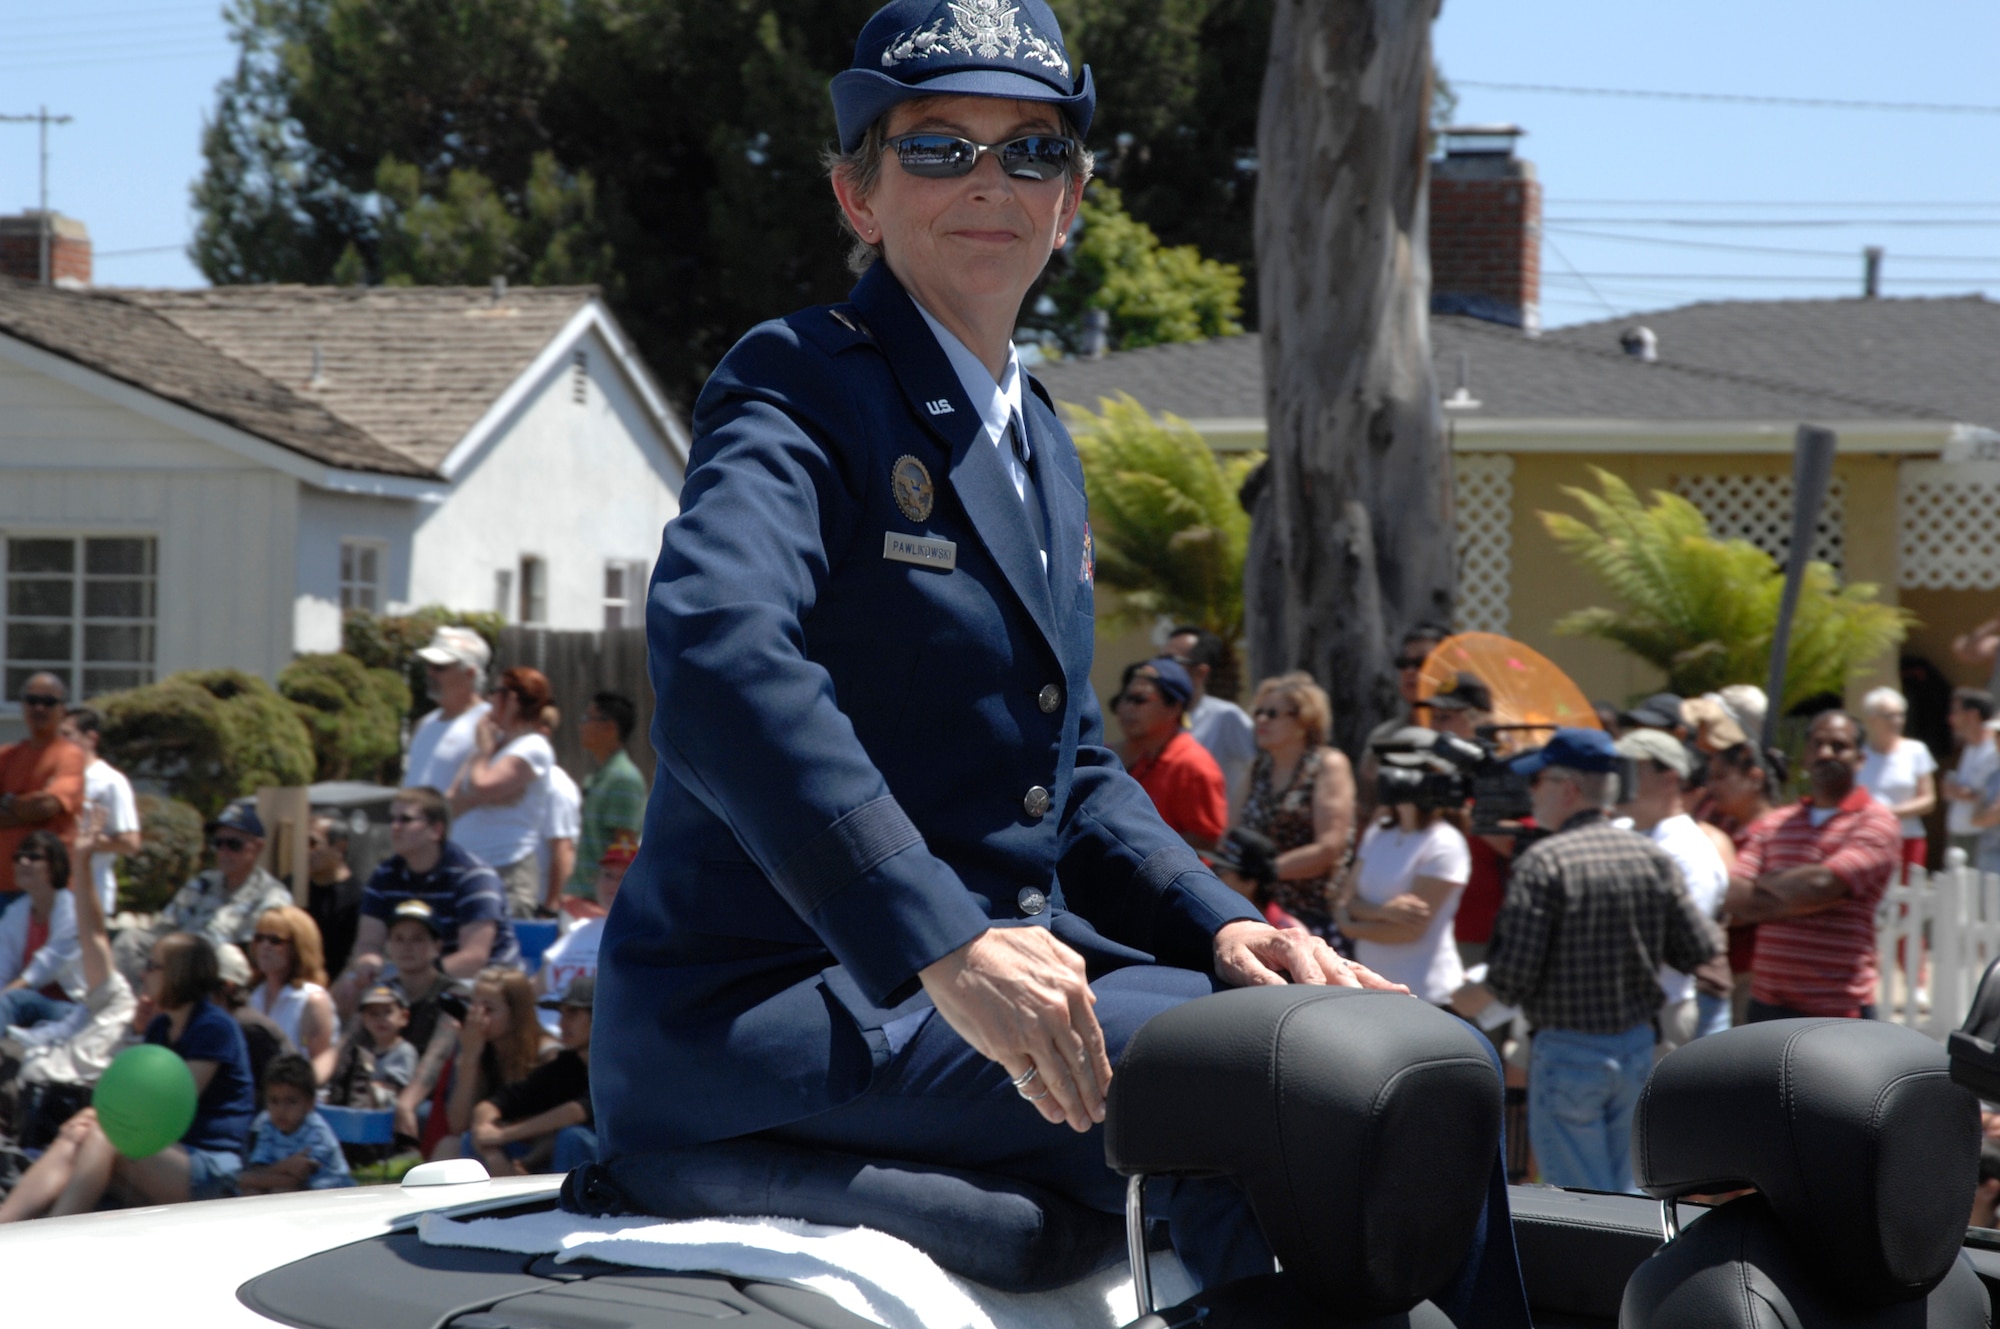 Brig. Gen. Ellen Pawlikowski, vice commander of the Space and Missile Systems Center, represented the Air Force in this year’s Torrance Armed Forces Day parade, May 17.  (Photo by Joe Juarez)